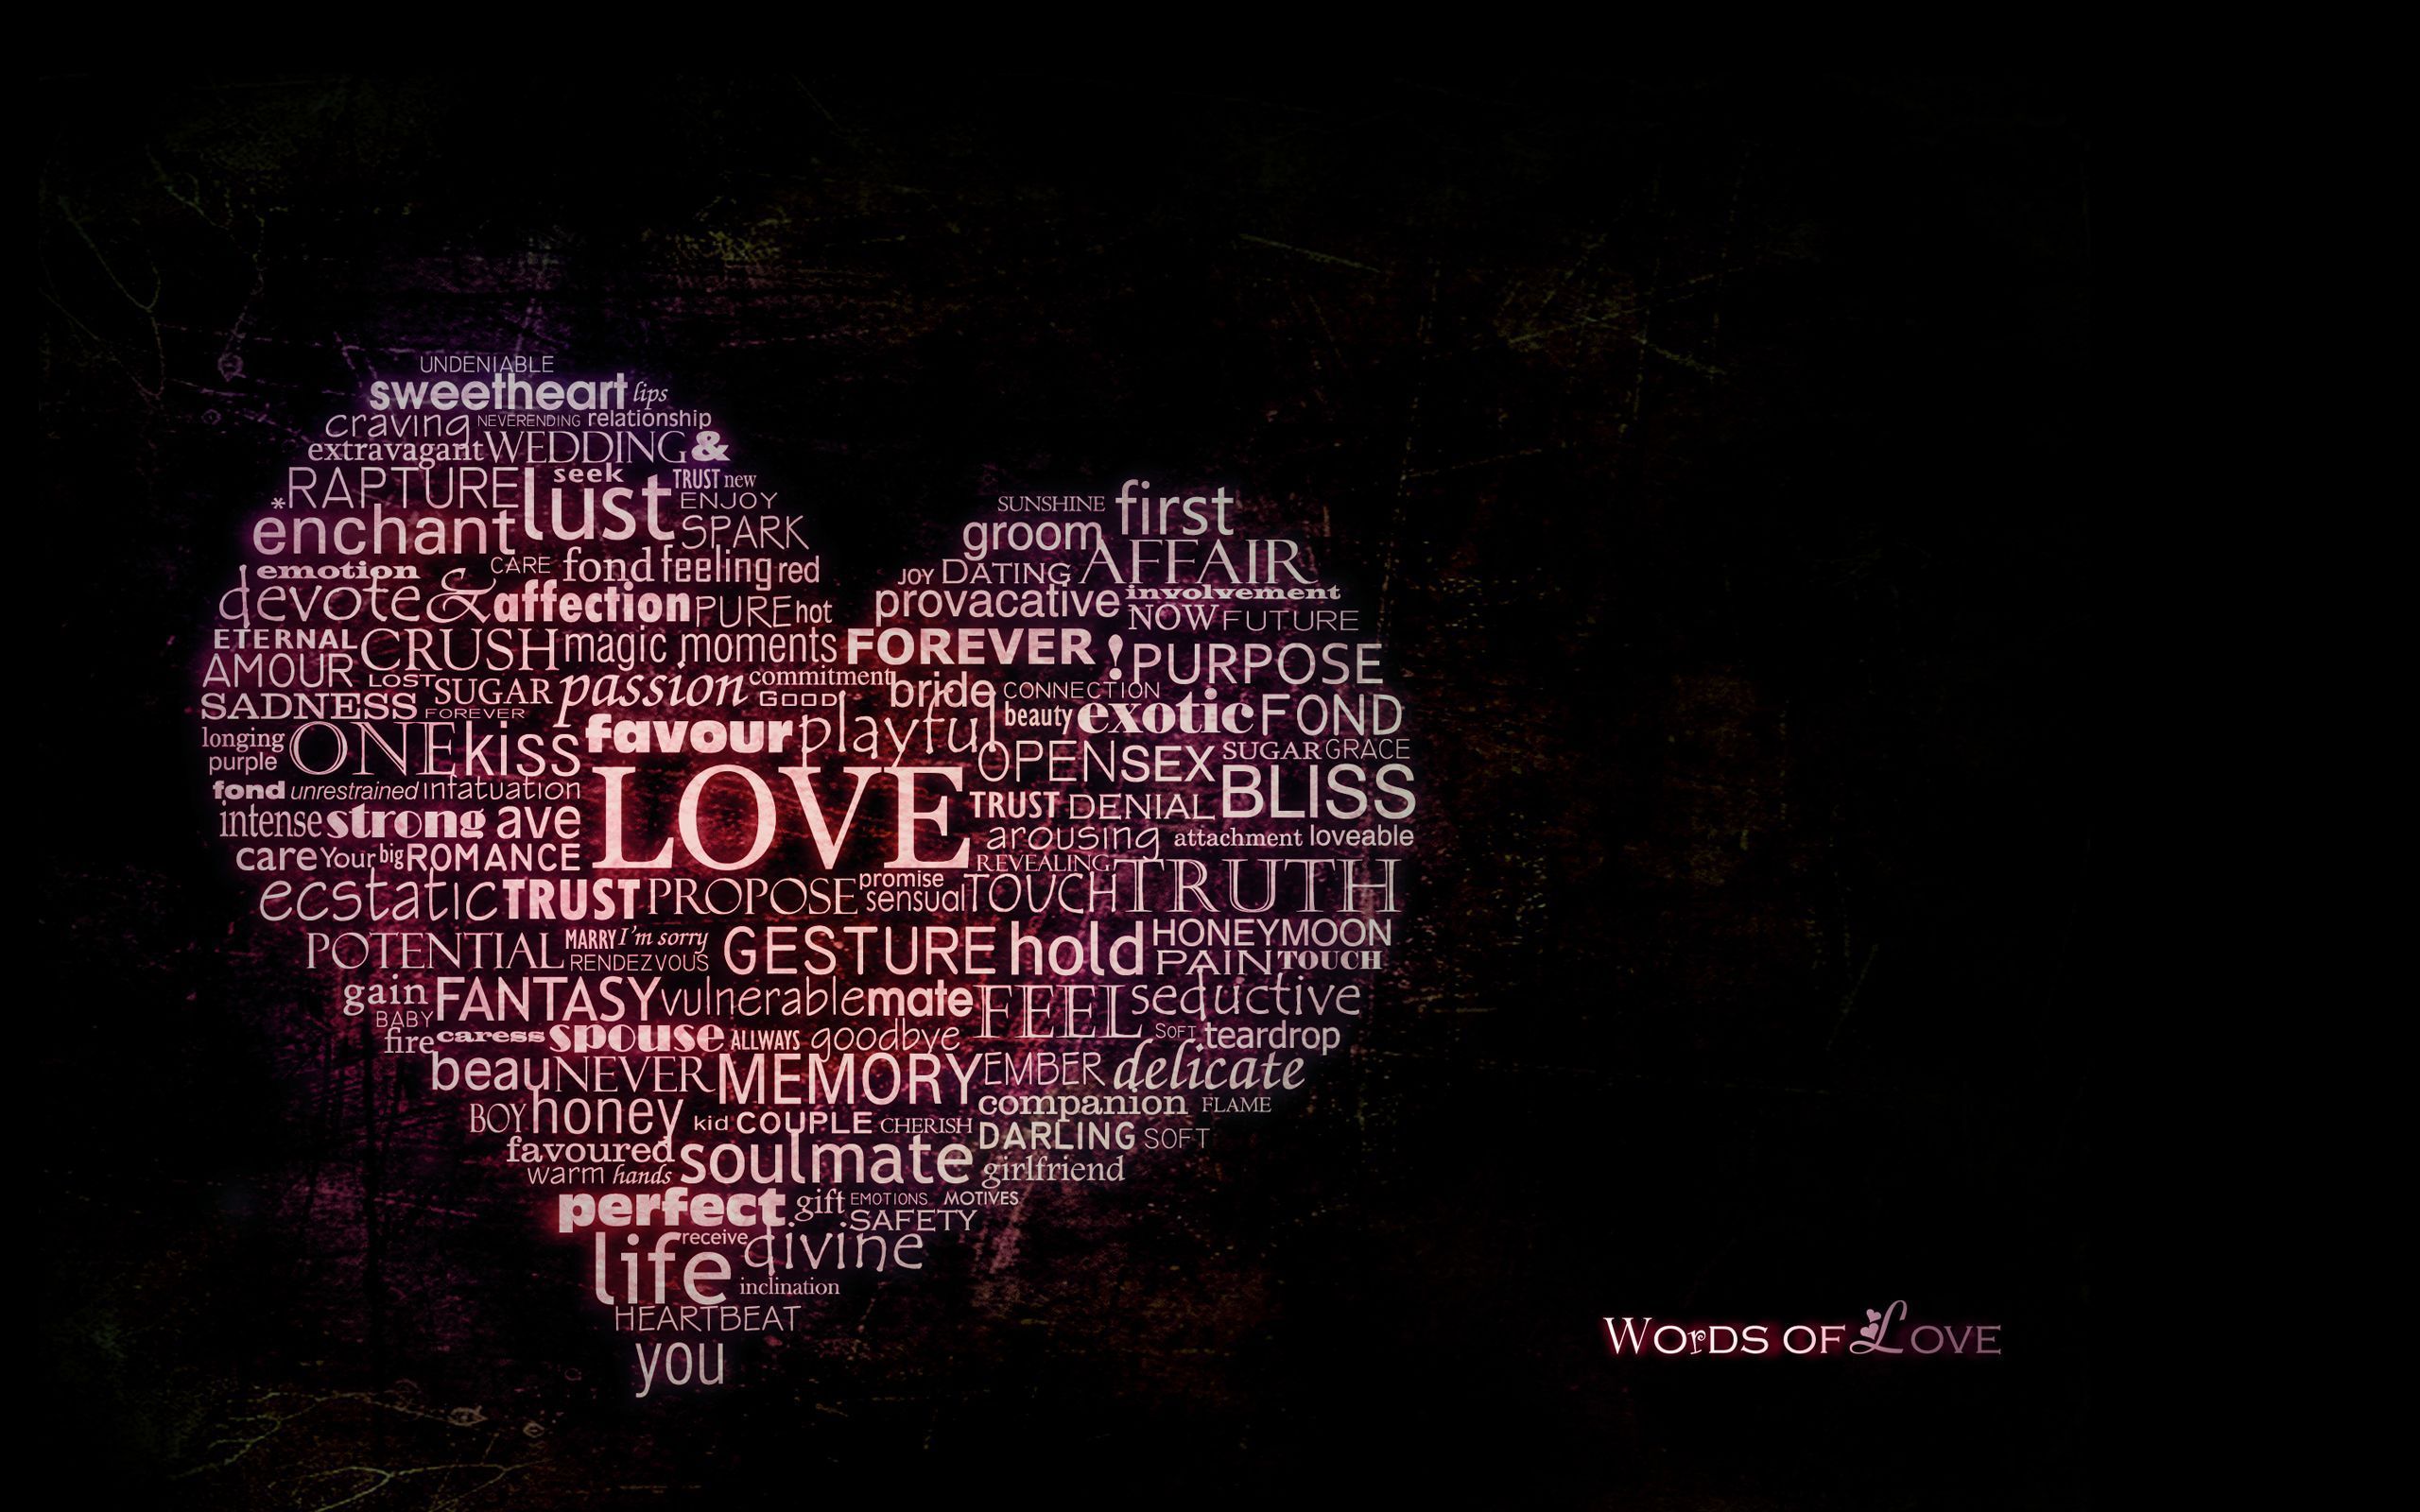 Words of Love Wallpapers HD Backgrounds